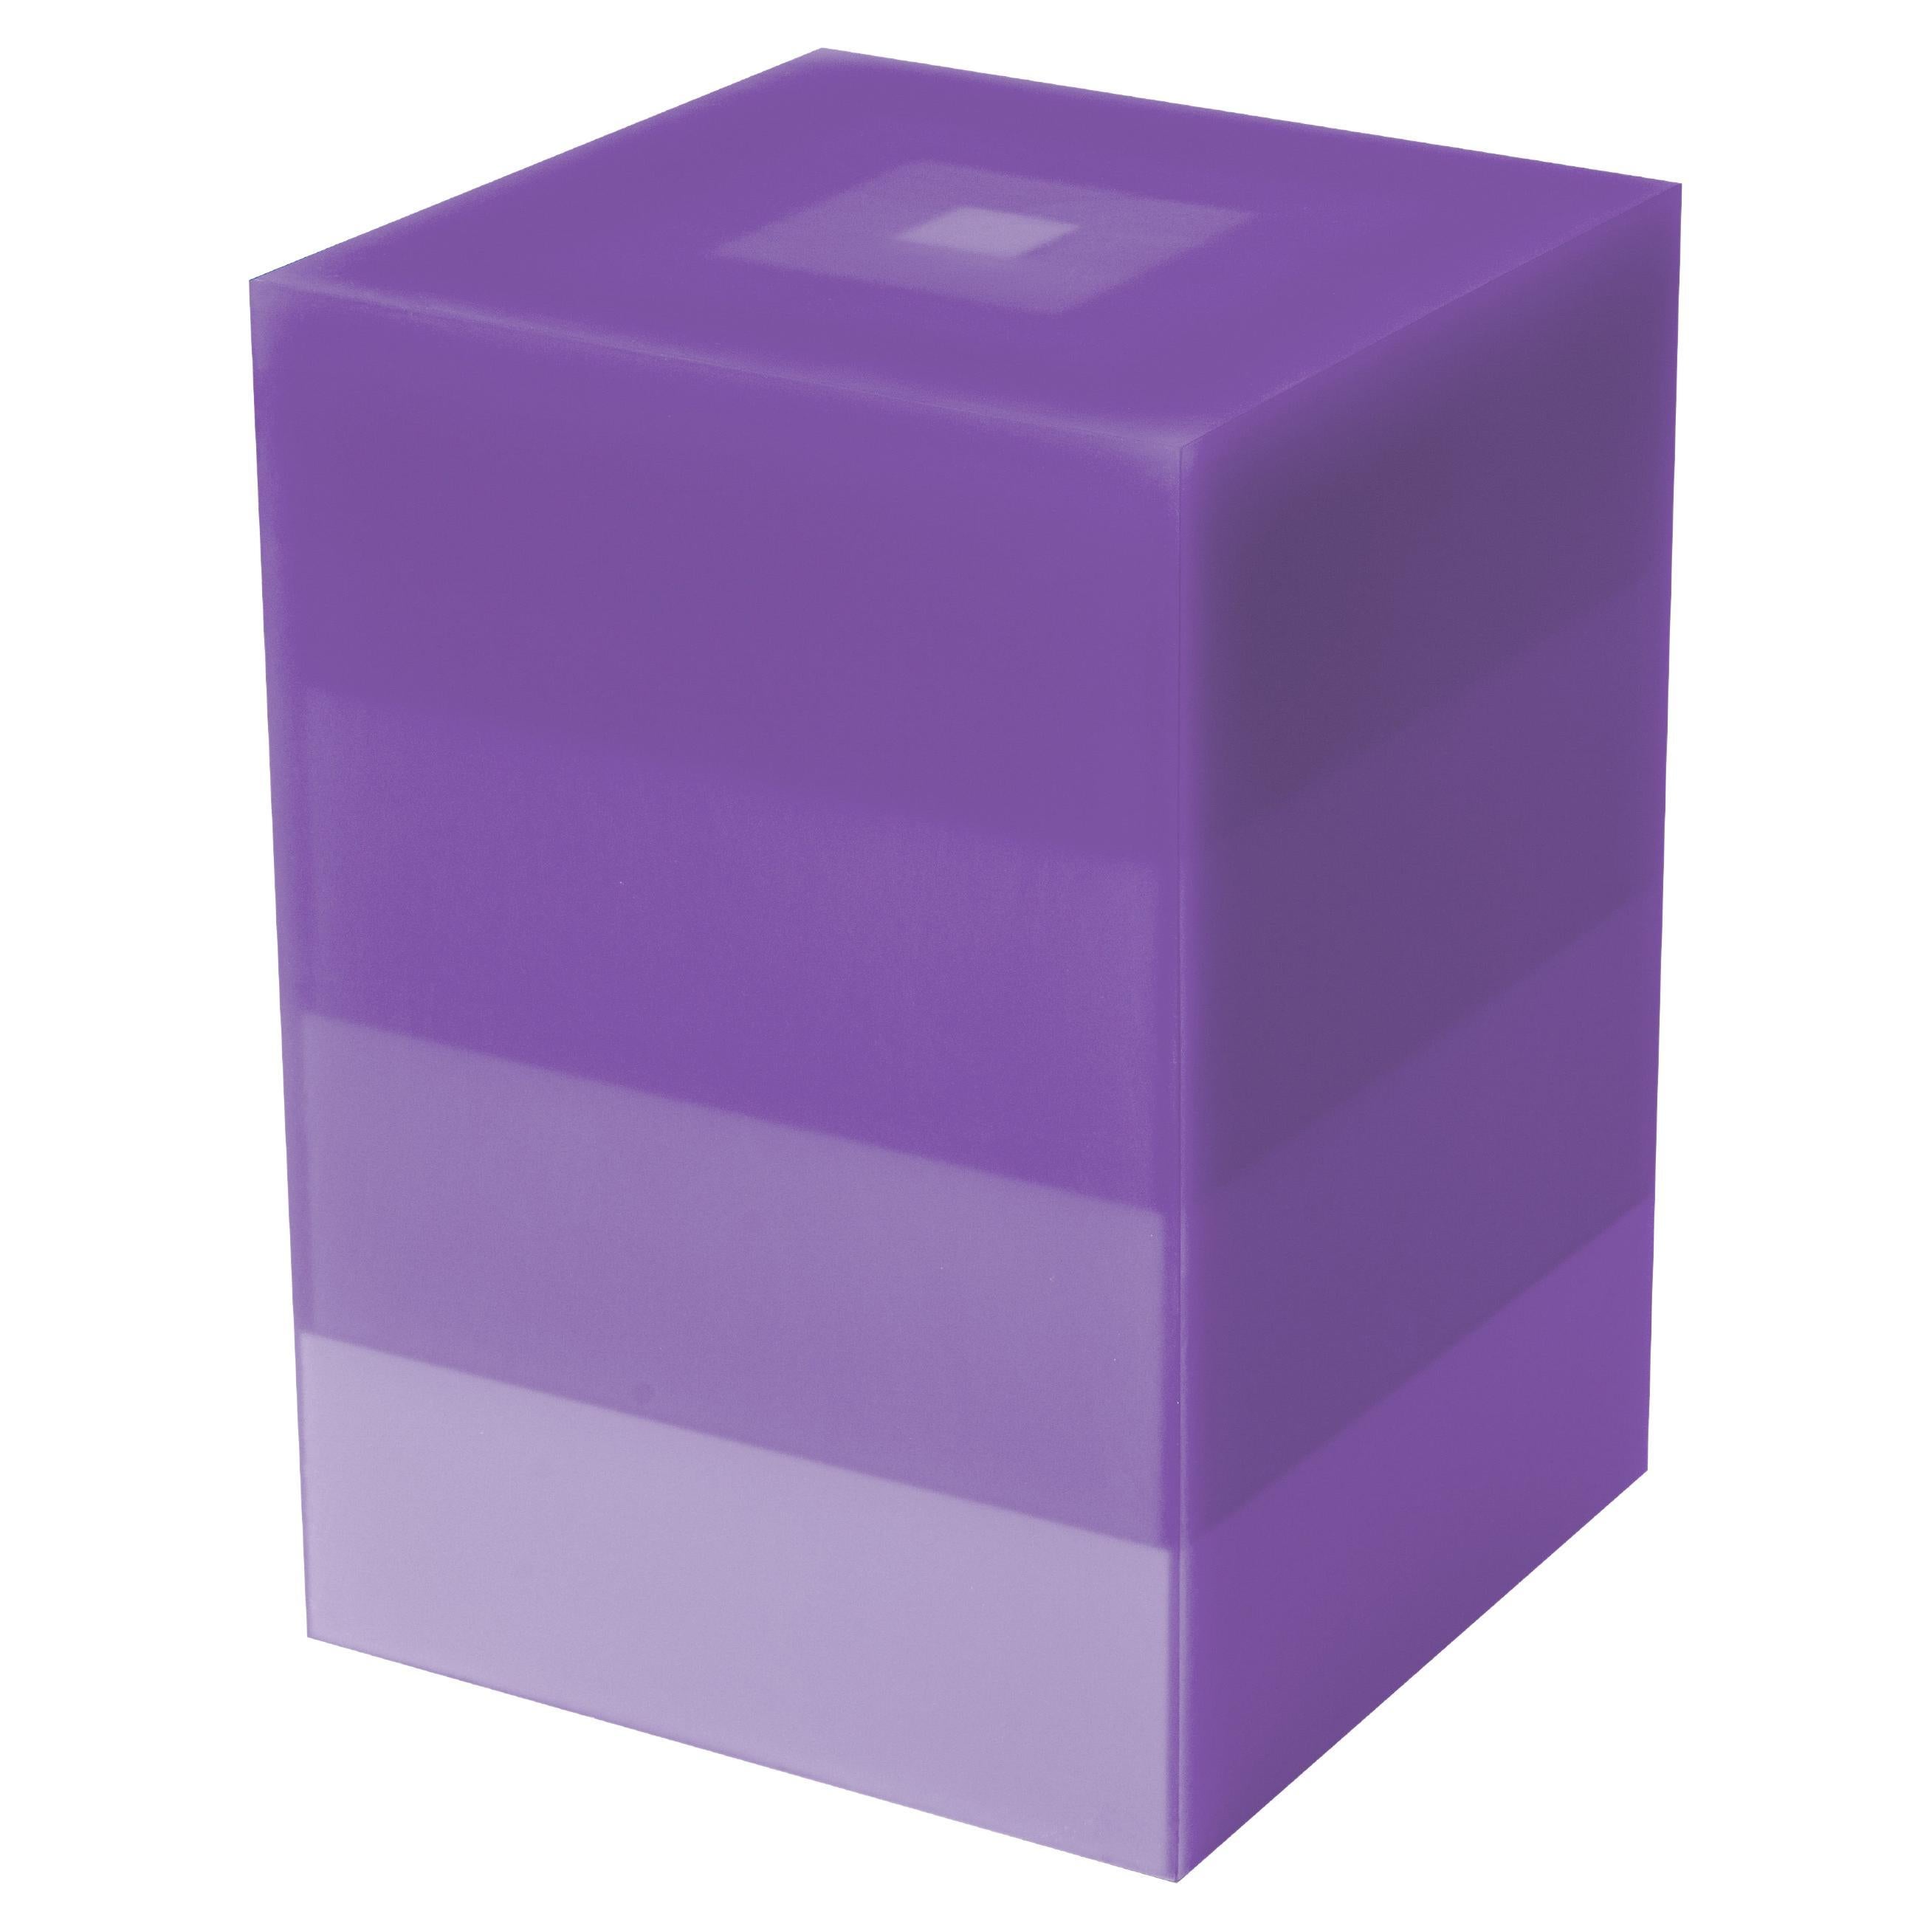 Scale Pyramid Resin Side Table/Stool In Purple by Facture, REP by TulesteFactory For Sale